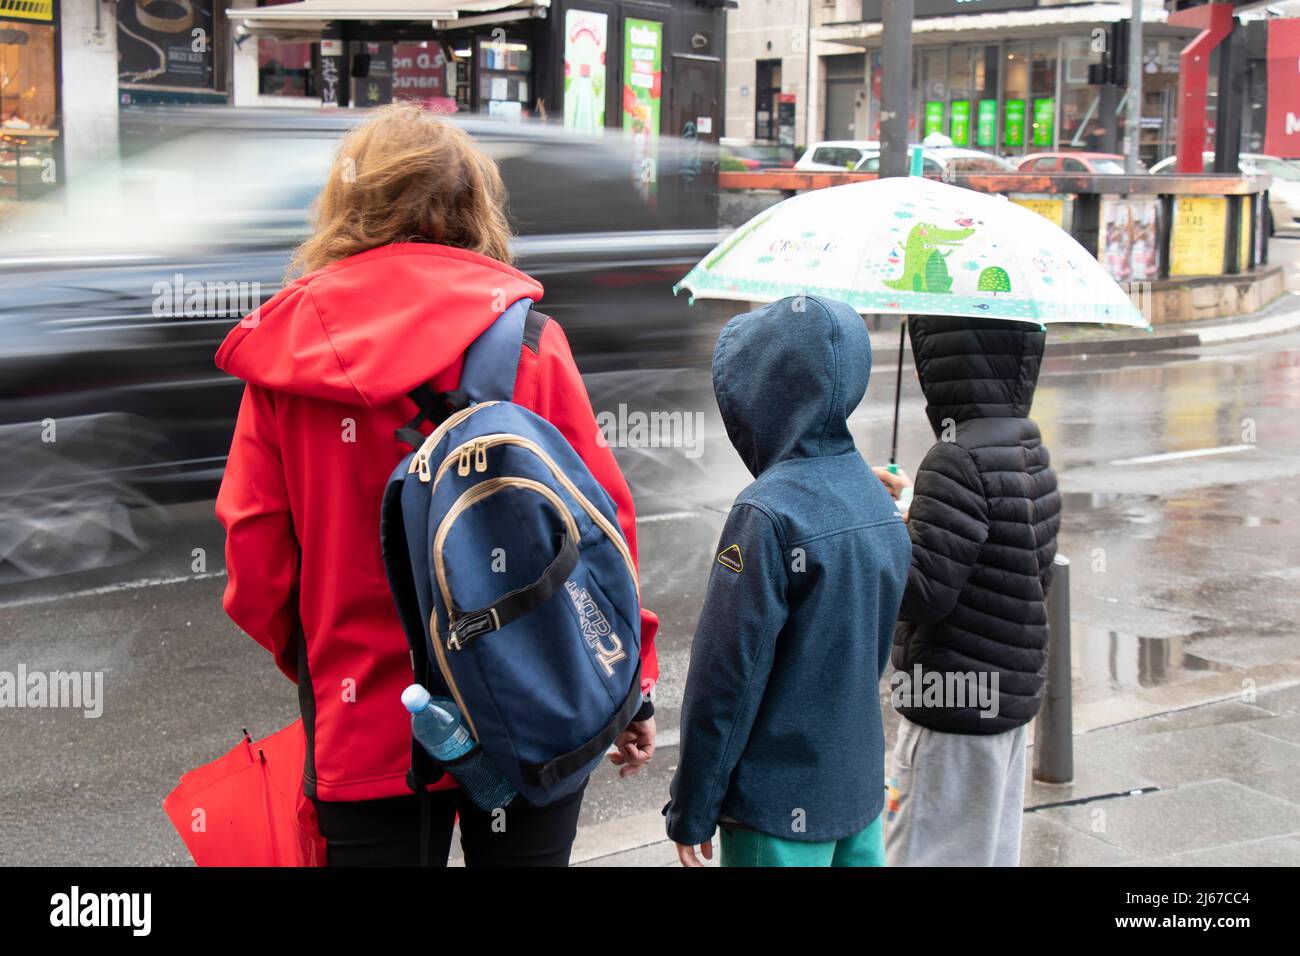 Belgrade, Serbia - April 27, 2022: Mother walking children to school and waiting at crossroad on a rainy day Stock Photo